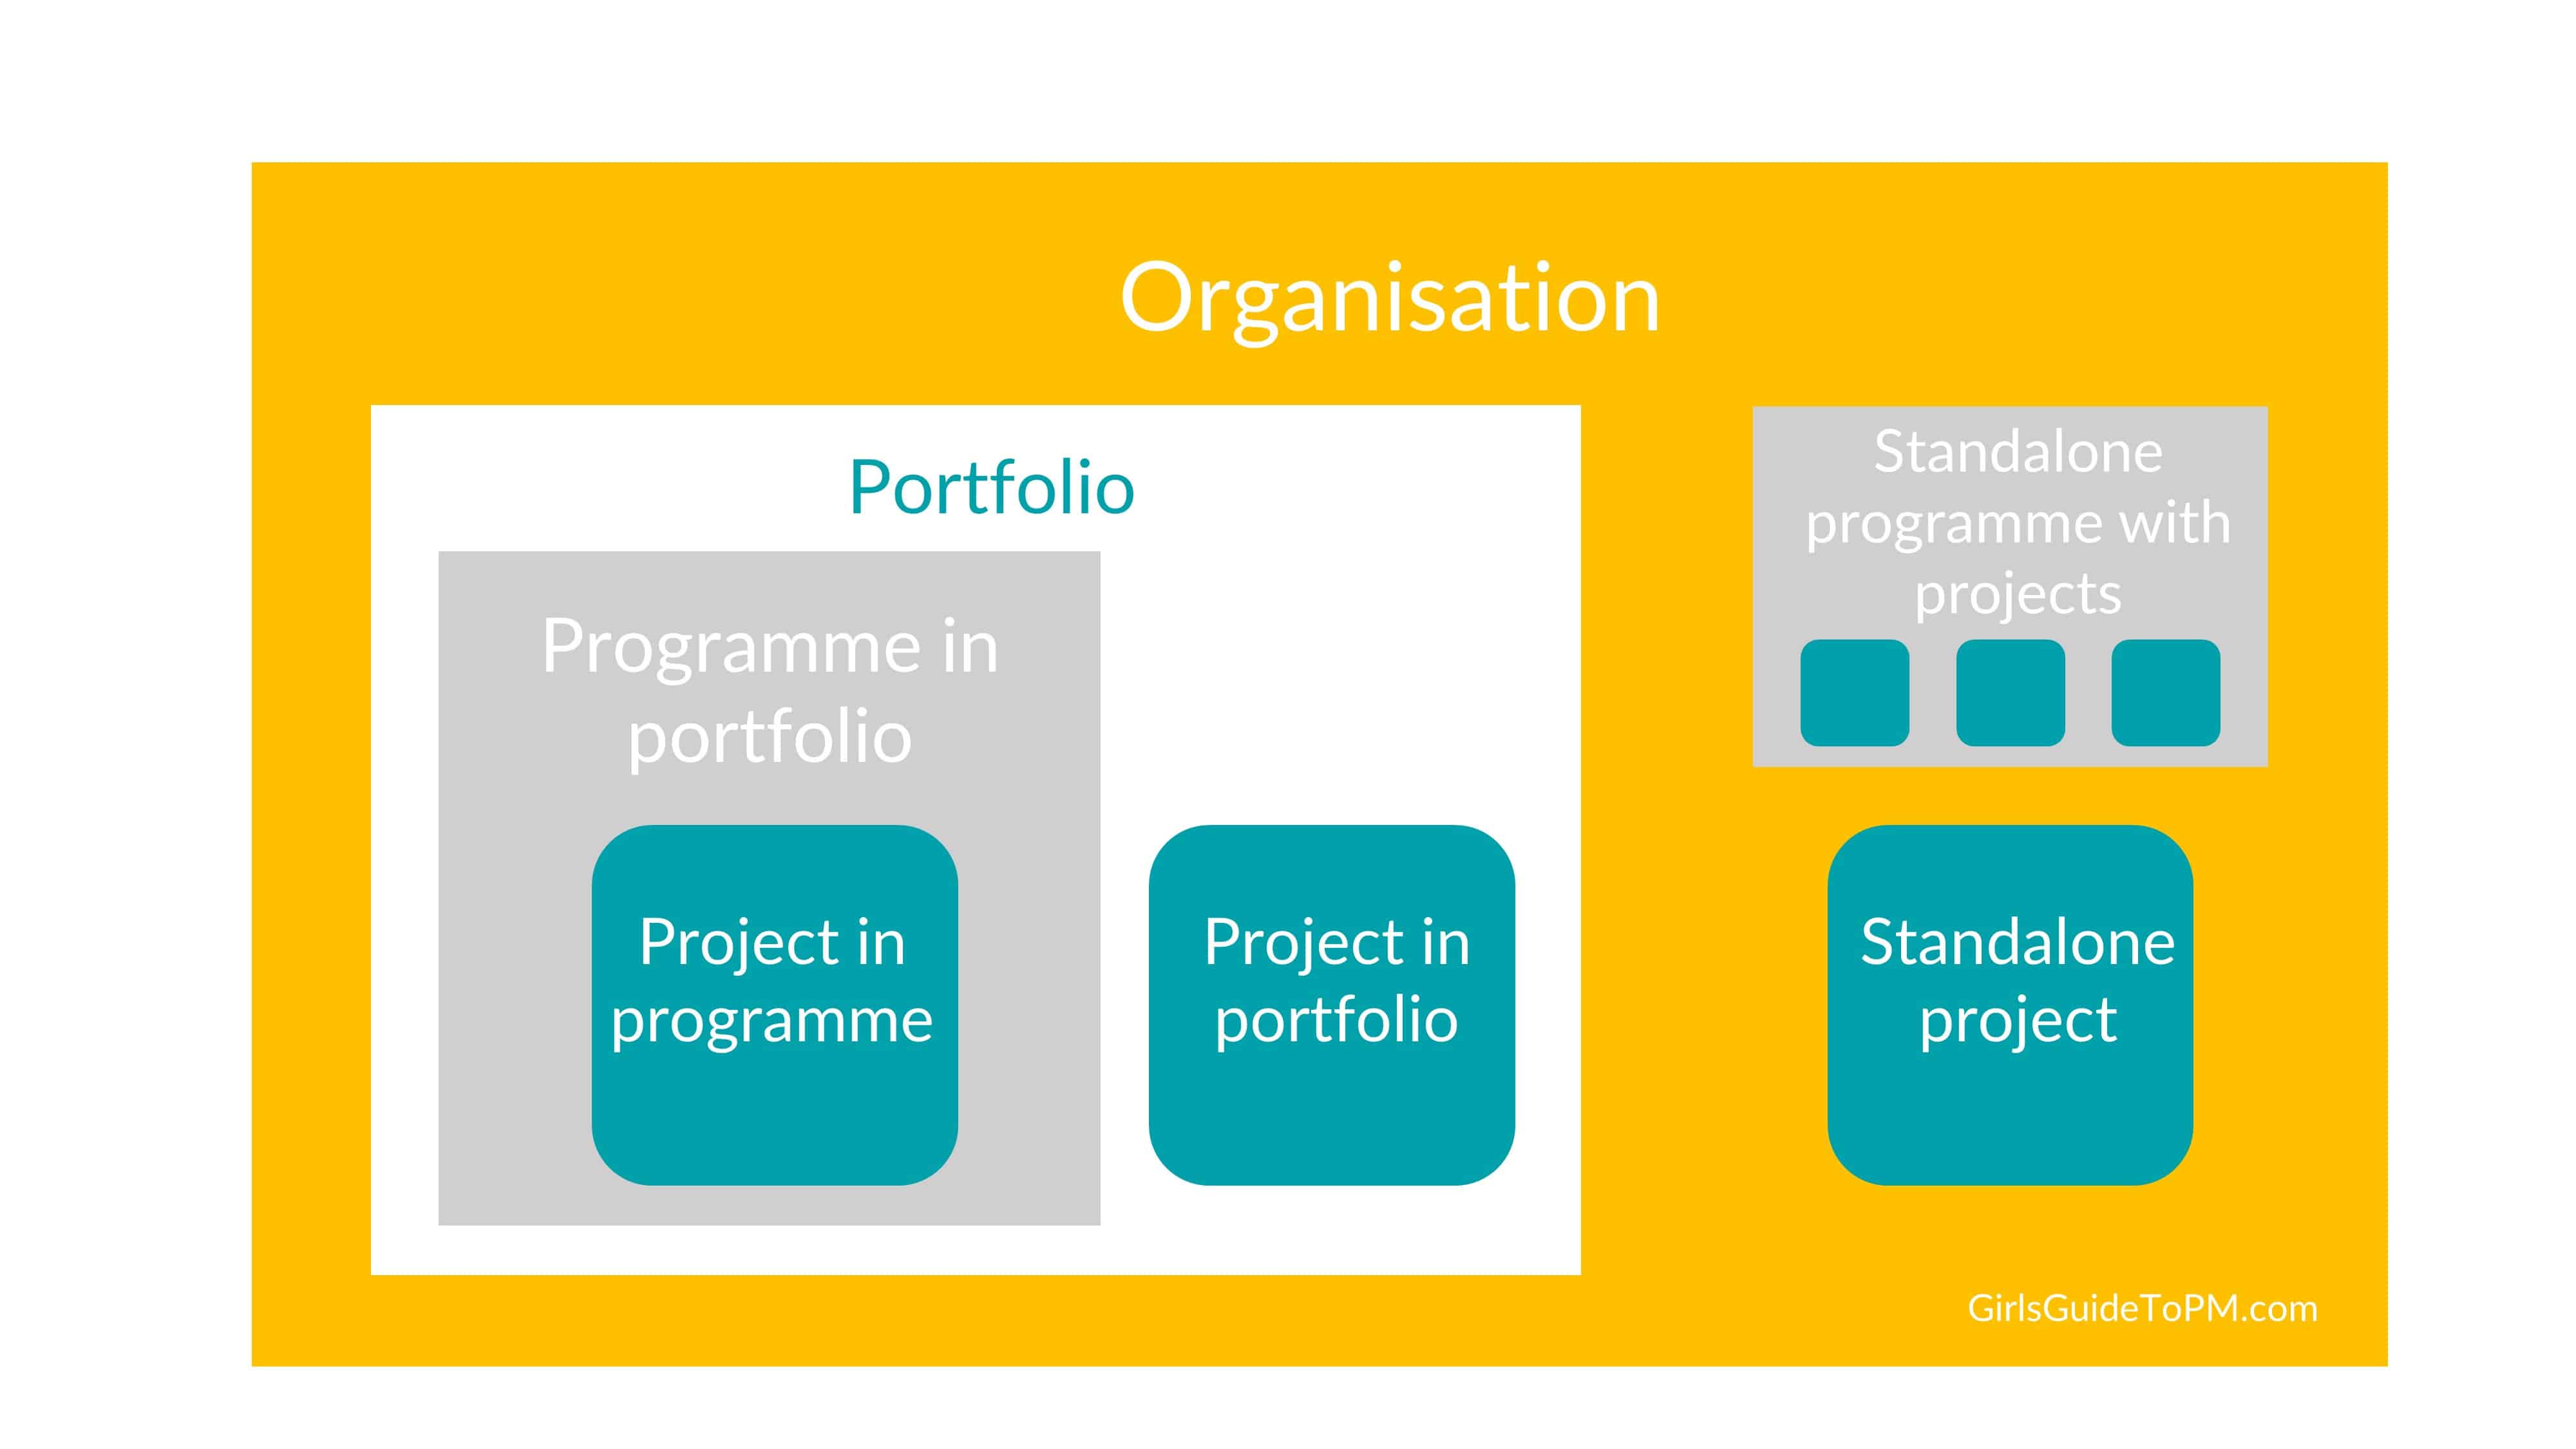 Portfolios are made up of programmes and projects